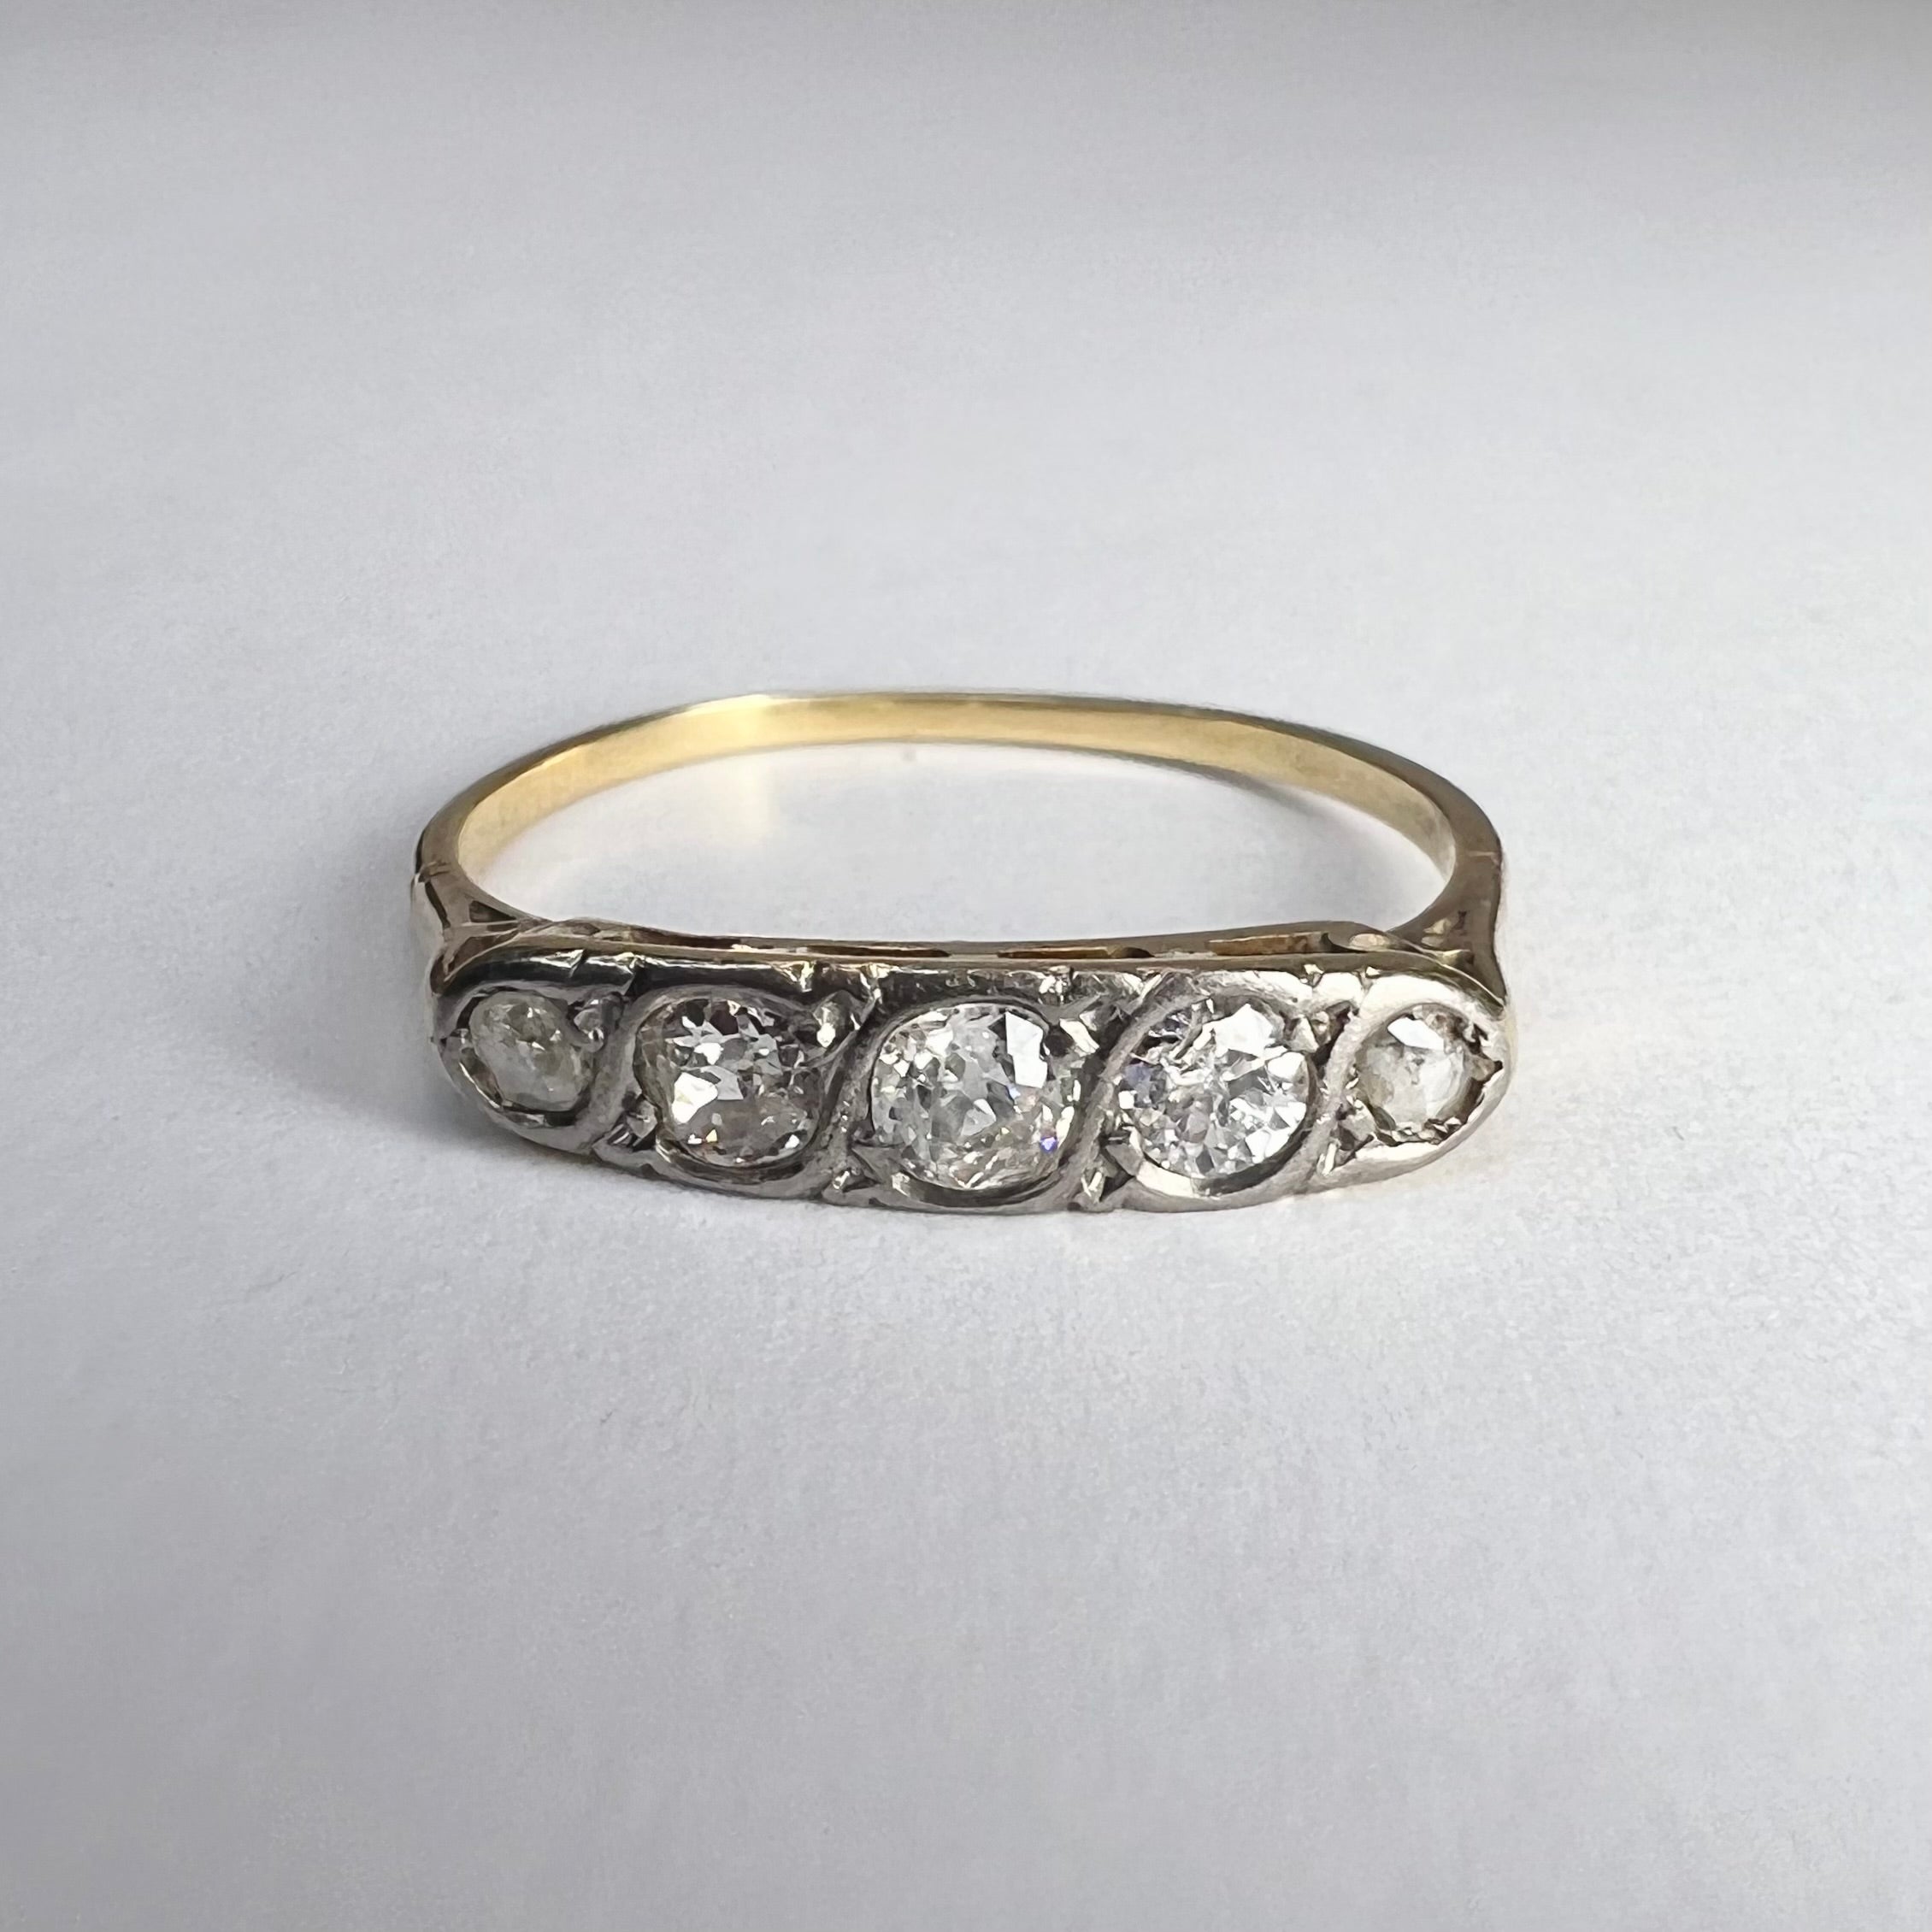 Antique 18K Yellow Gold and Platinum 0.45CTW Diamond Ring Band Size 8